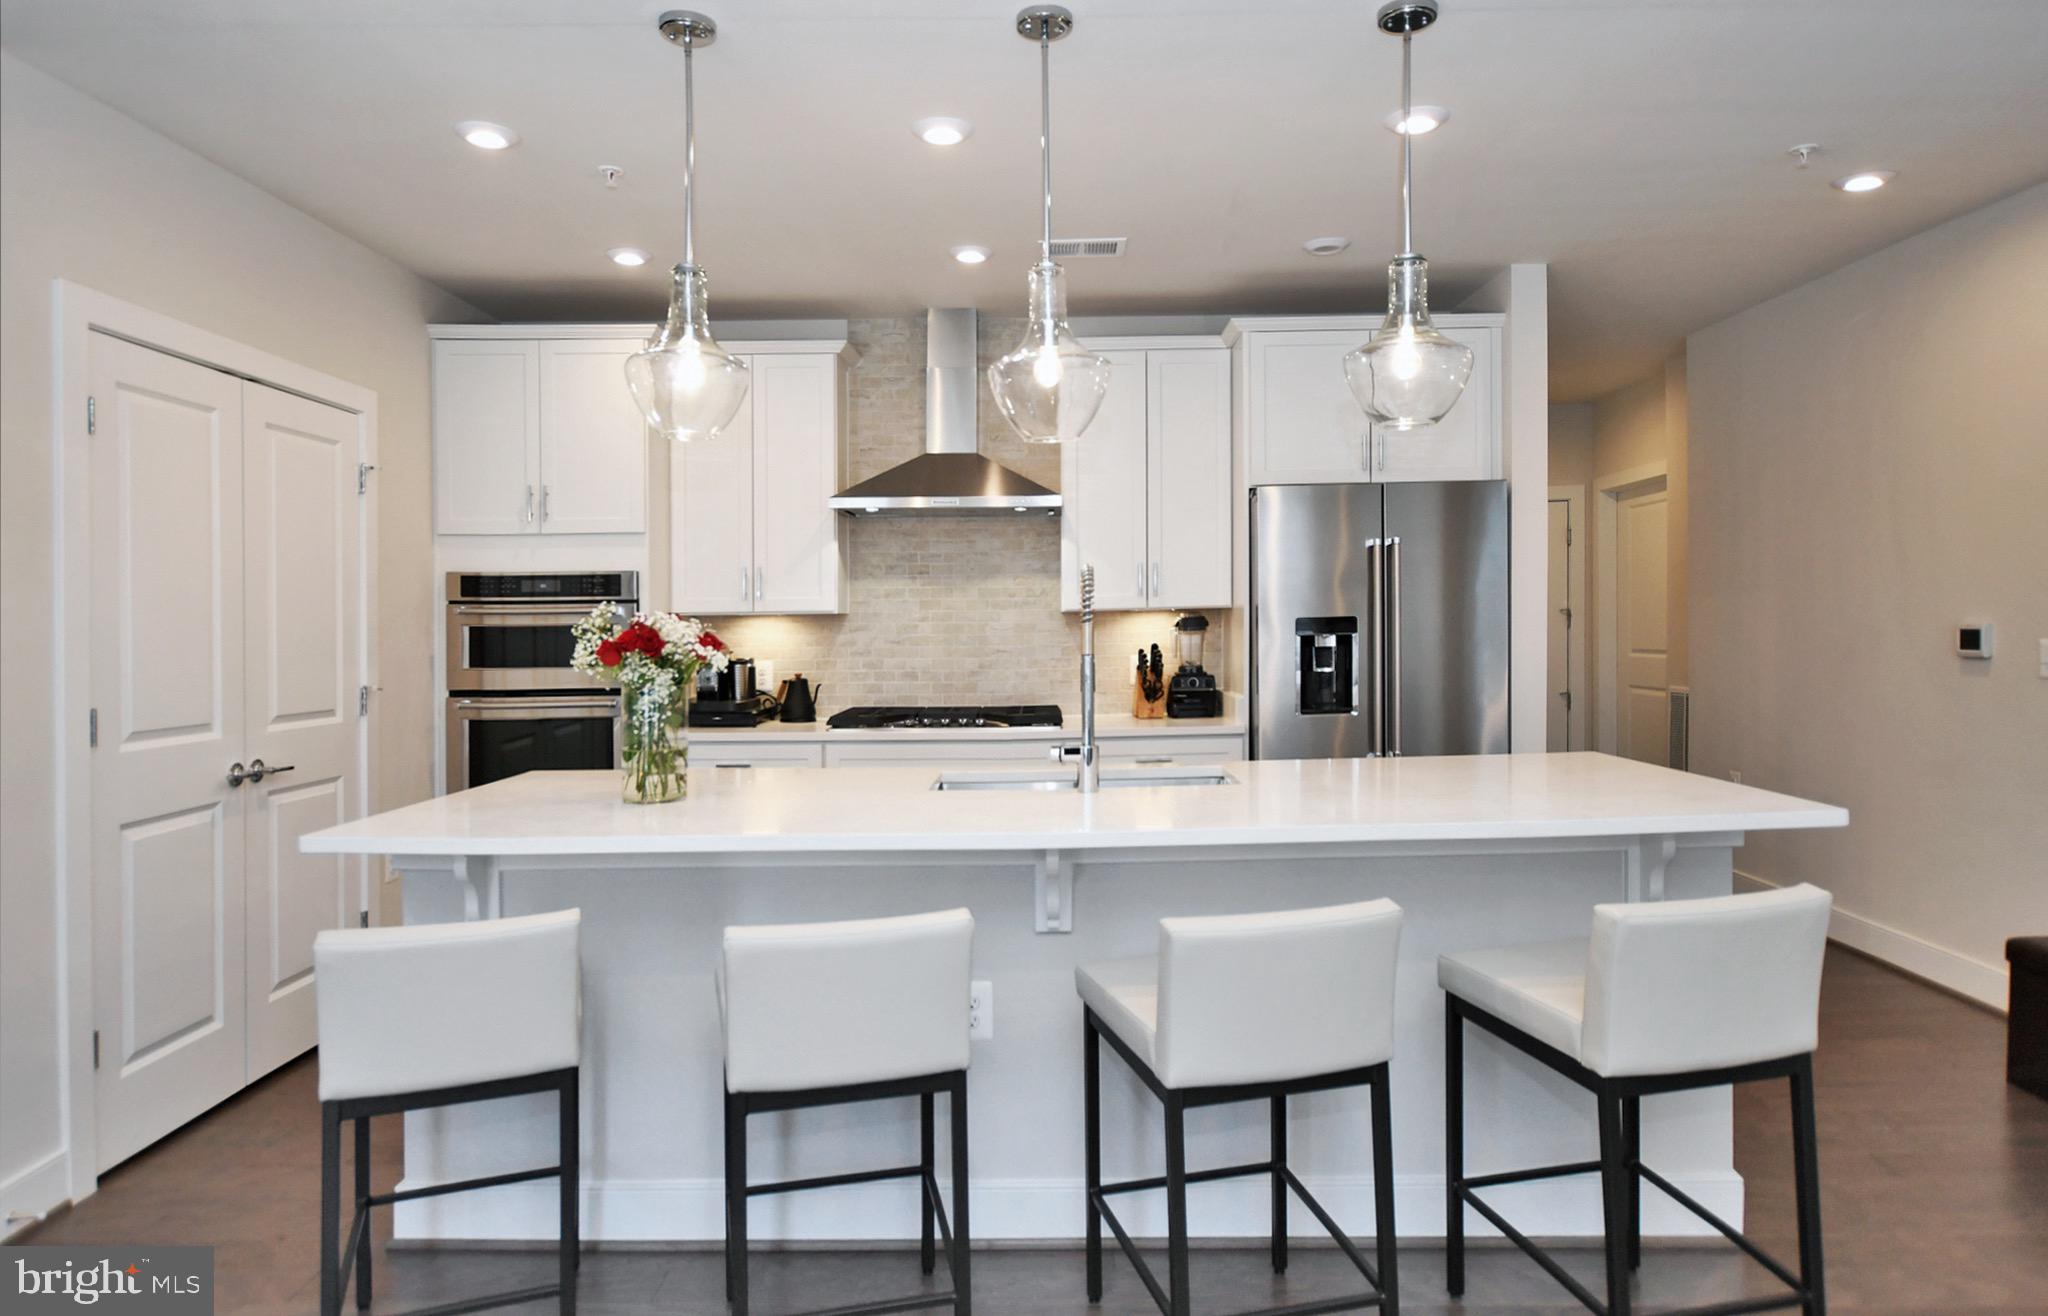 a kitchen with stainless steel appliances granite countertop a dining table chairs refrigerator and white cabinets